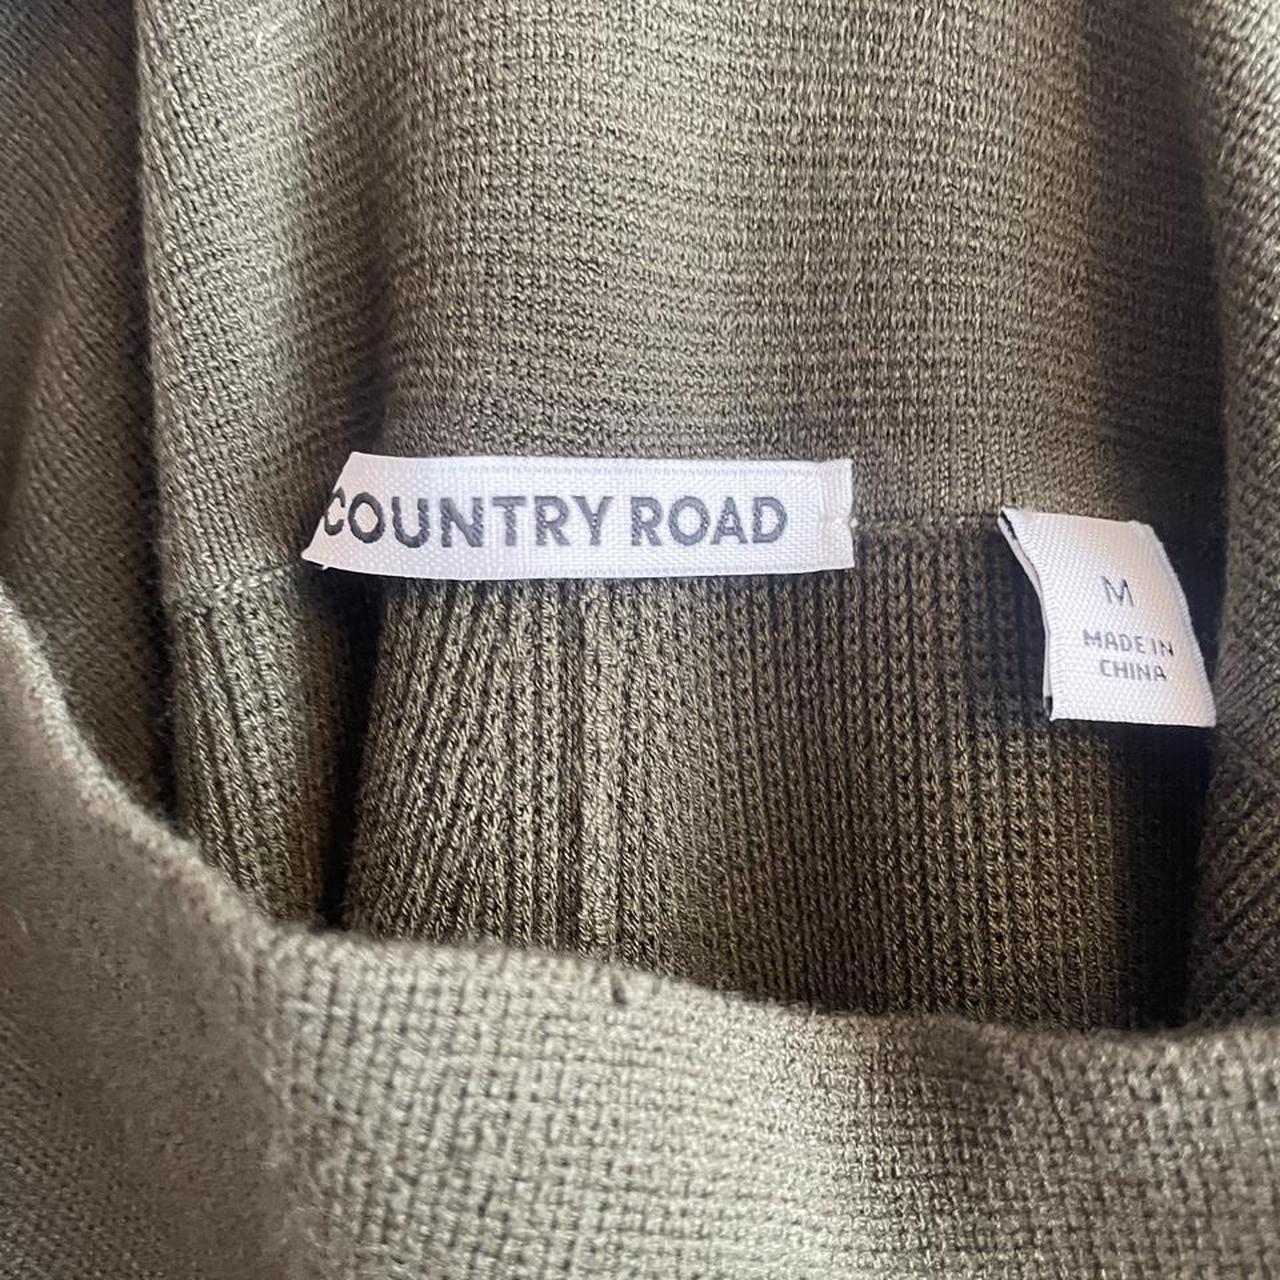 Brand new beautiful quality country road #knit #wool... - Depop